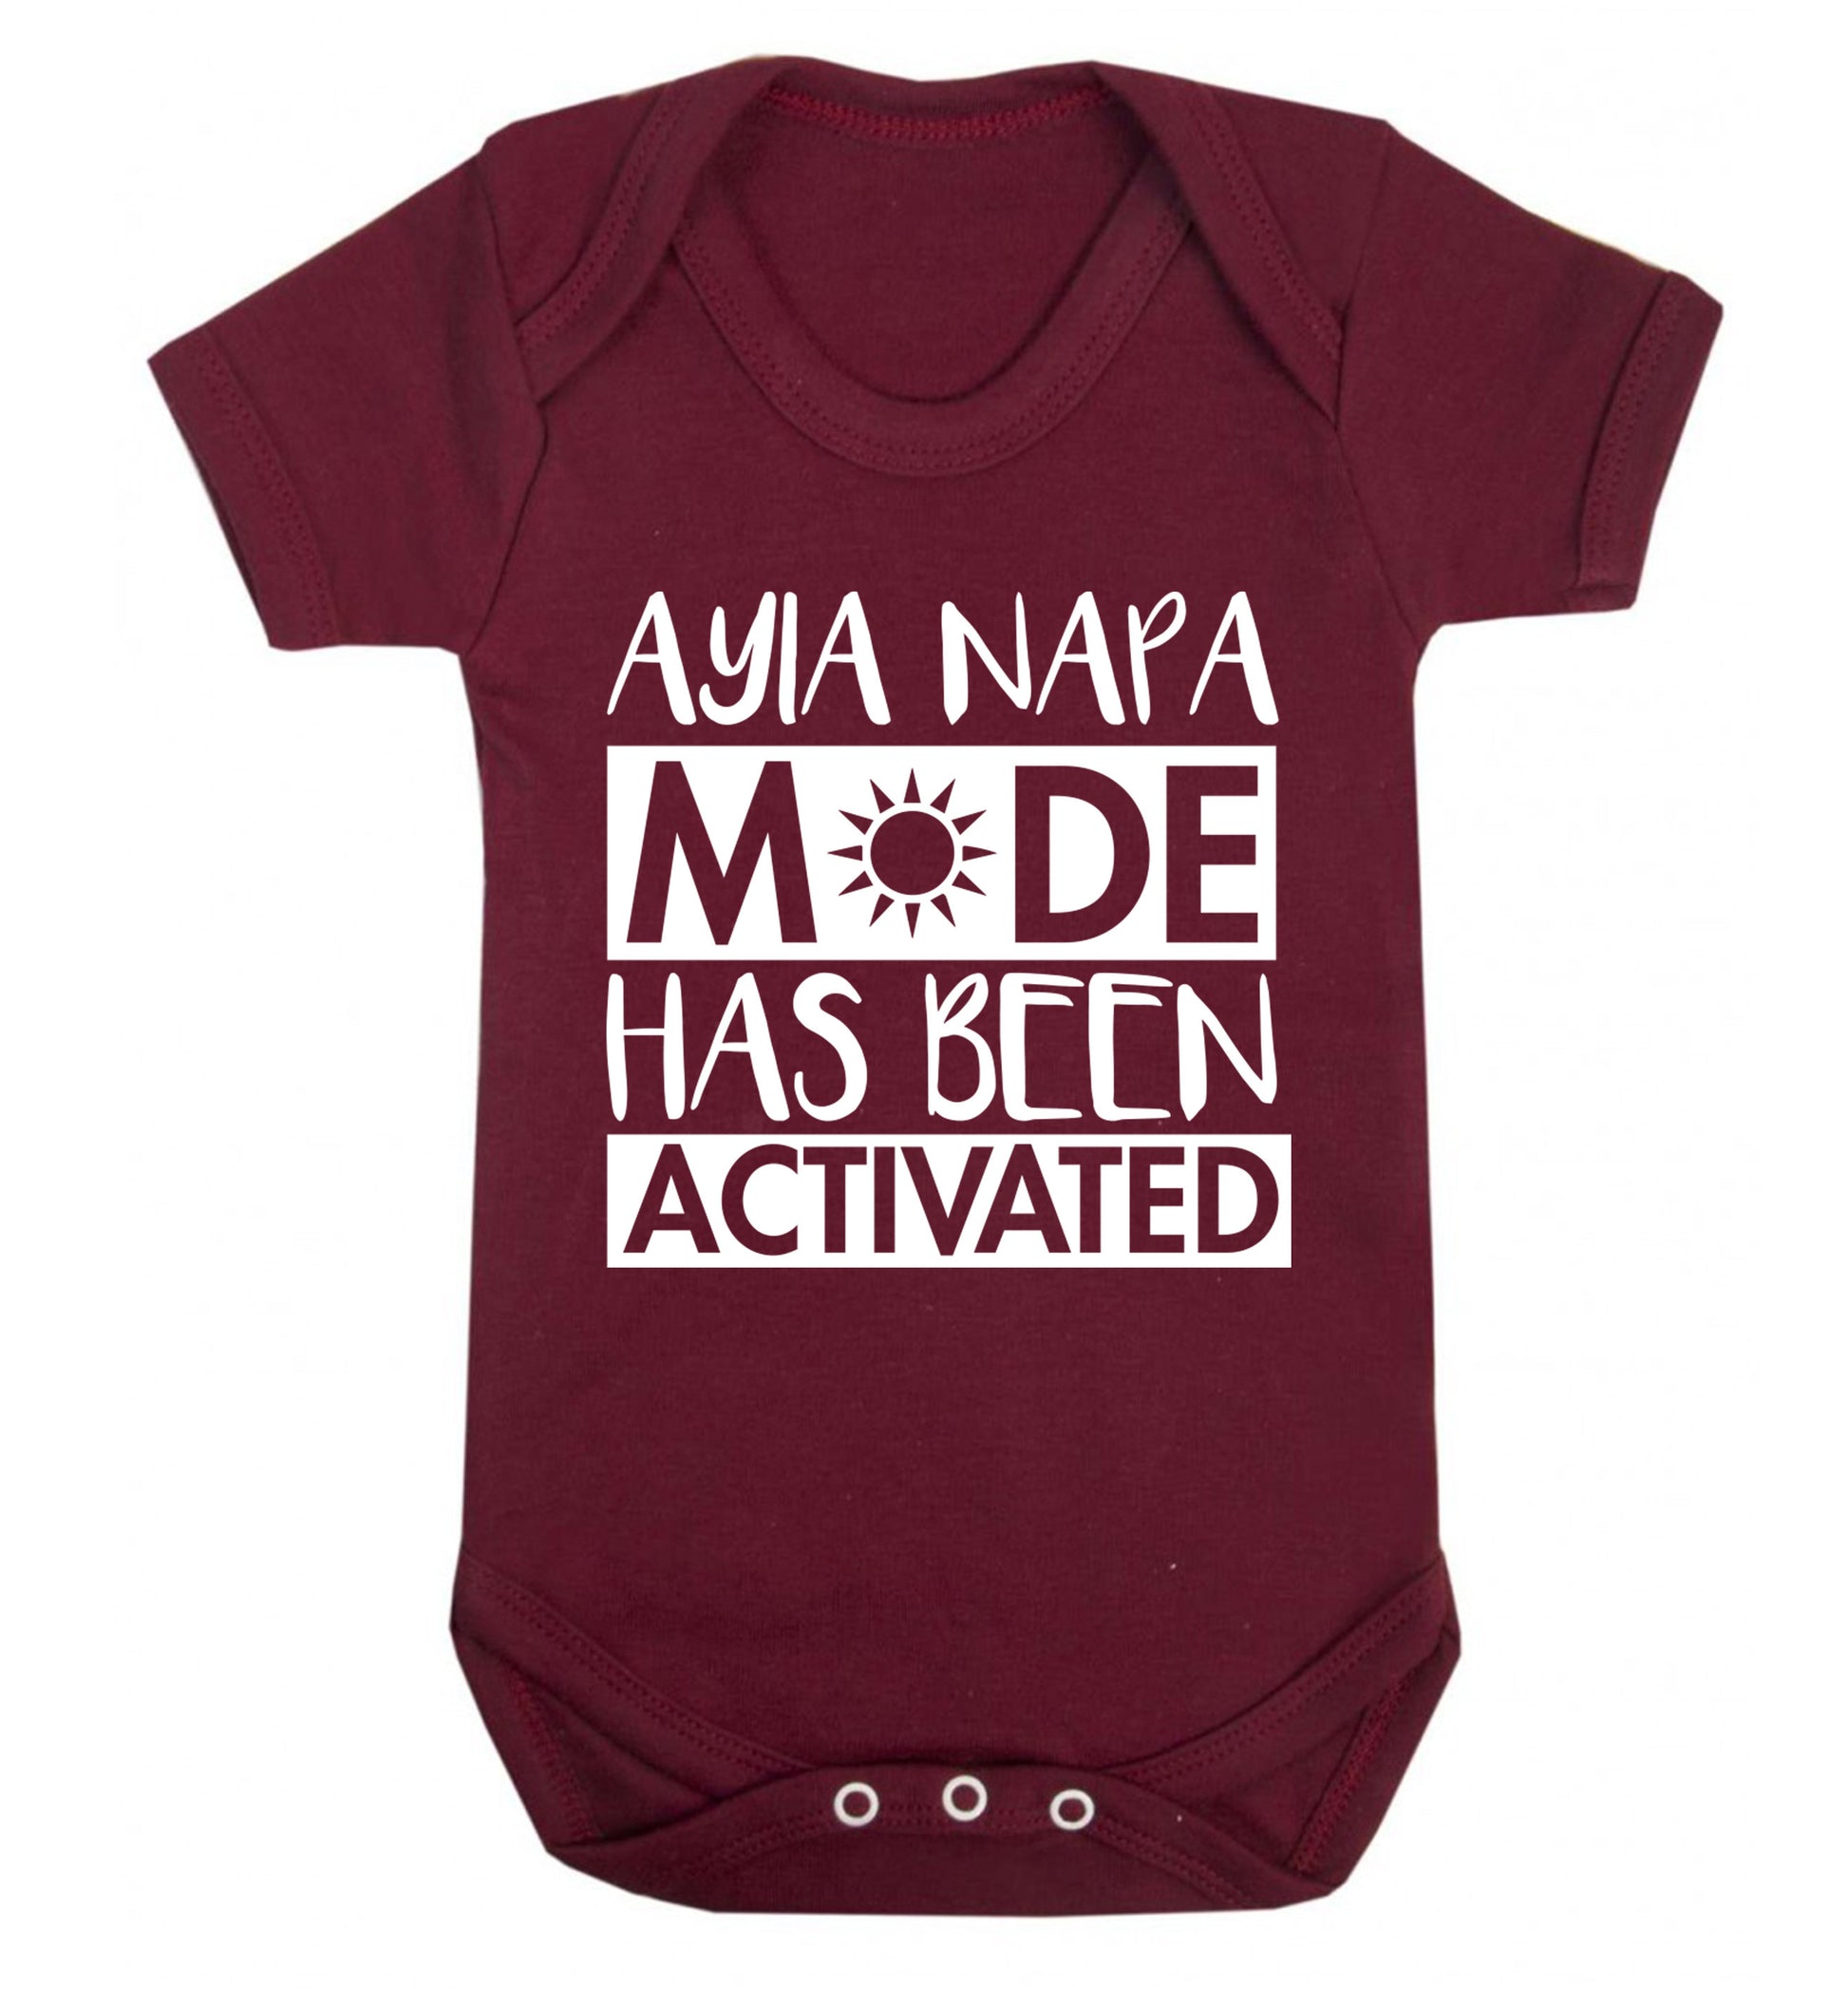 Aiya Napa mode has been activated Baby Vest maroon 18-24 months